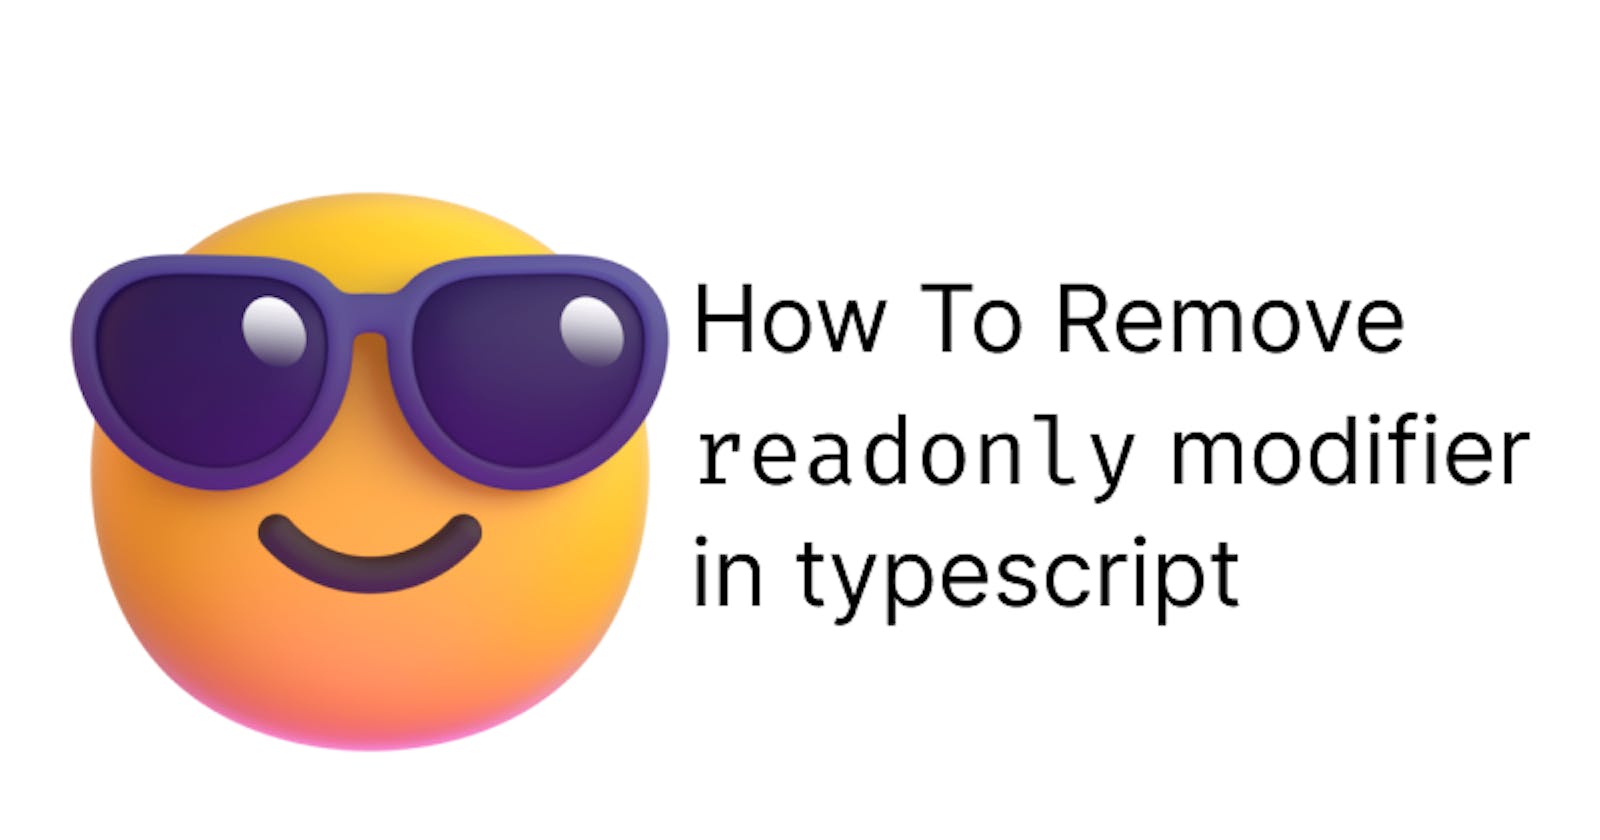 How to remove the readonly modifier in typescript